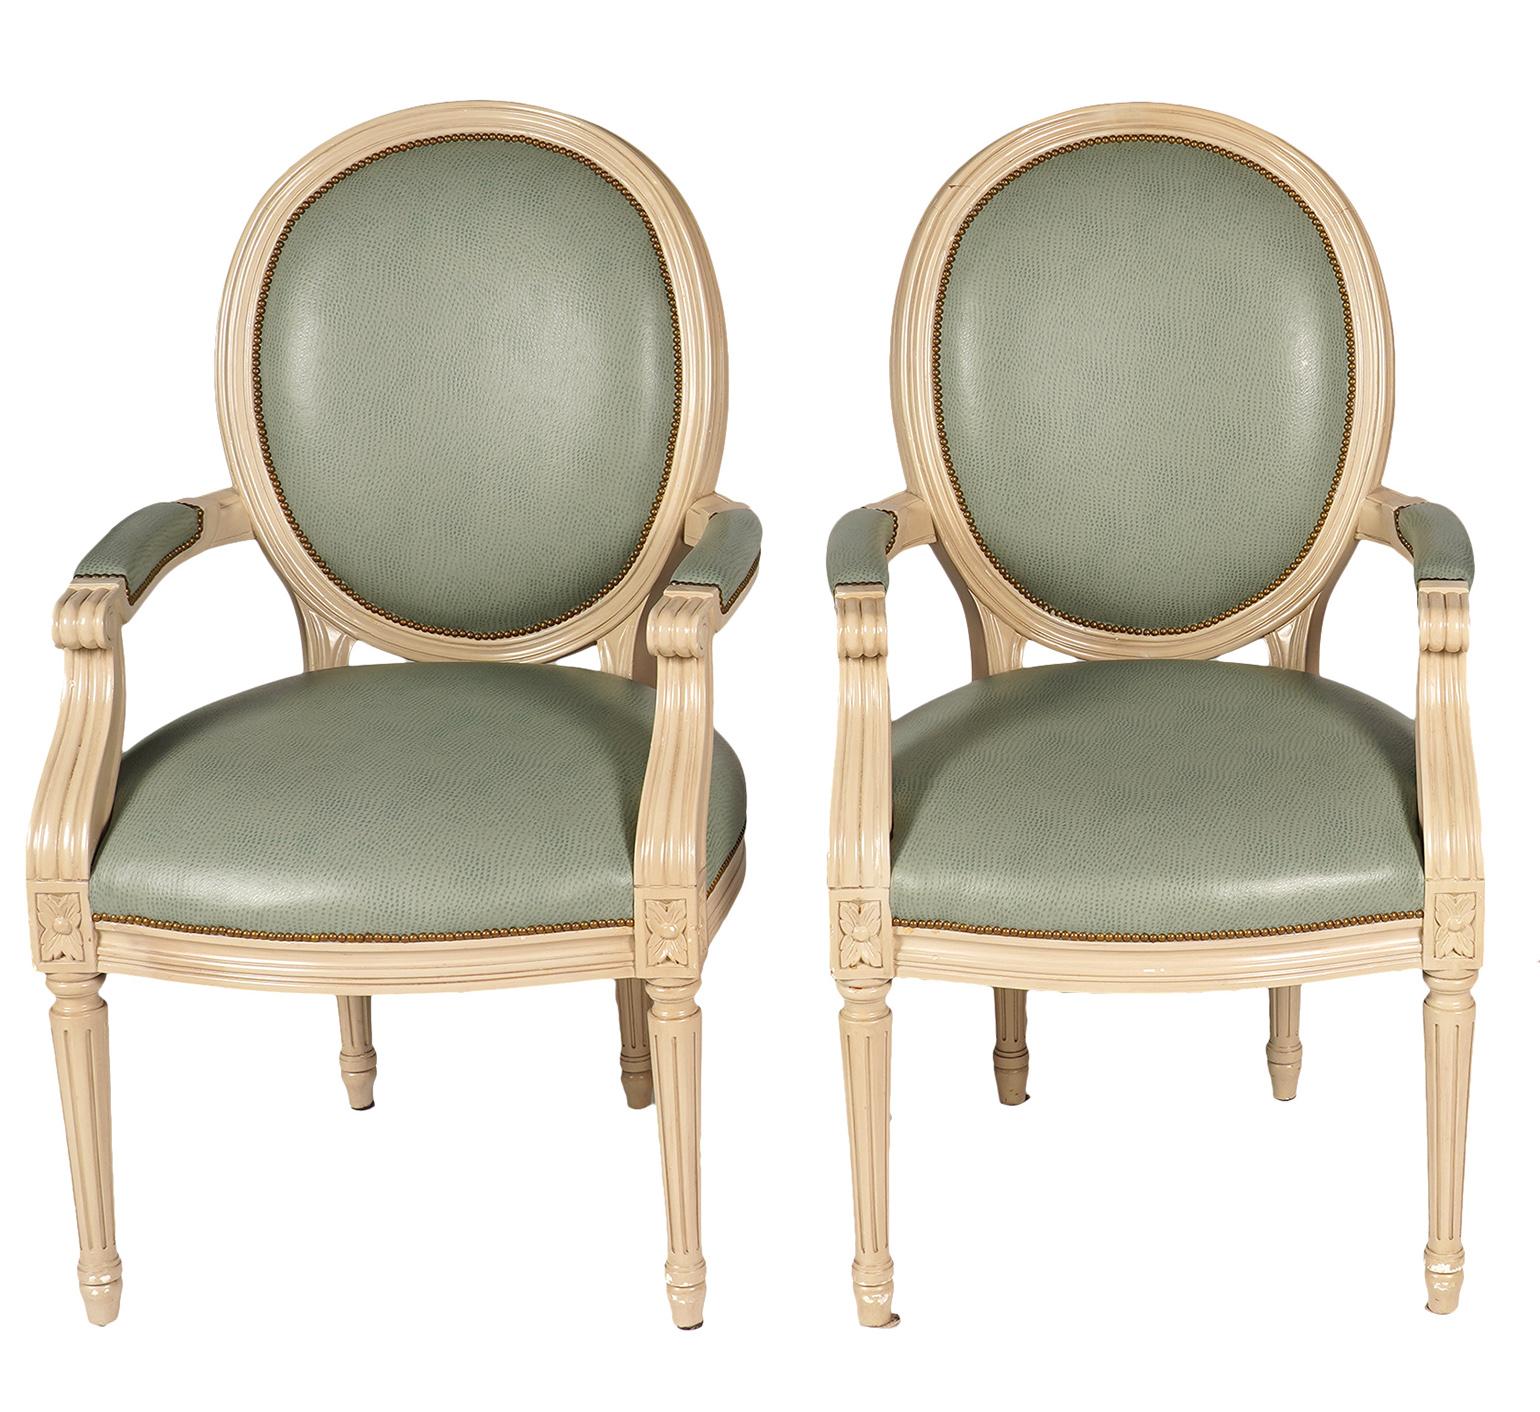 French Group of Six Louis XVI Style Painted and upholstered Oval Back Armchairs, 20th C